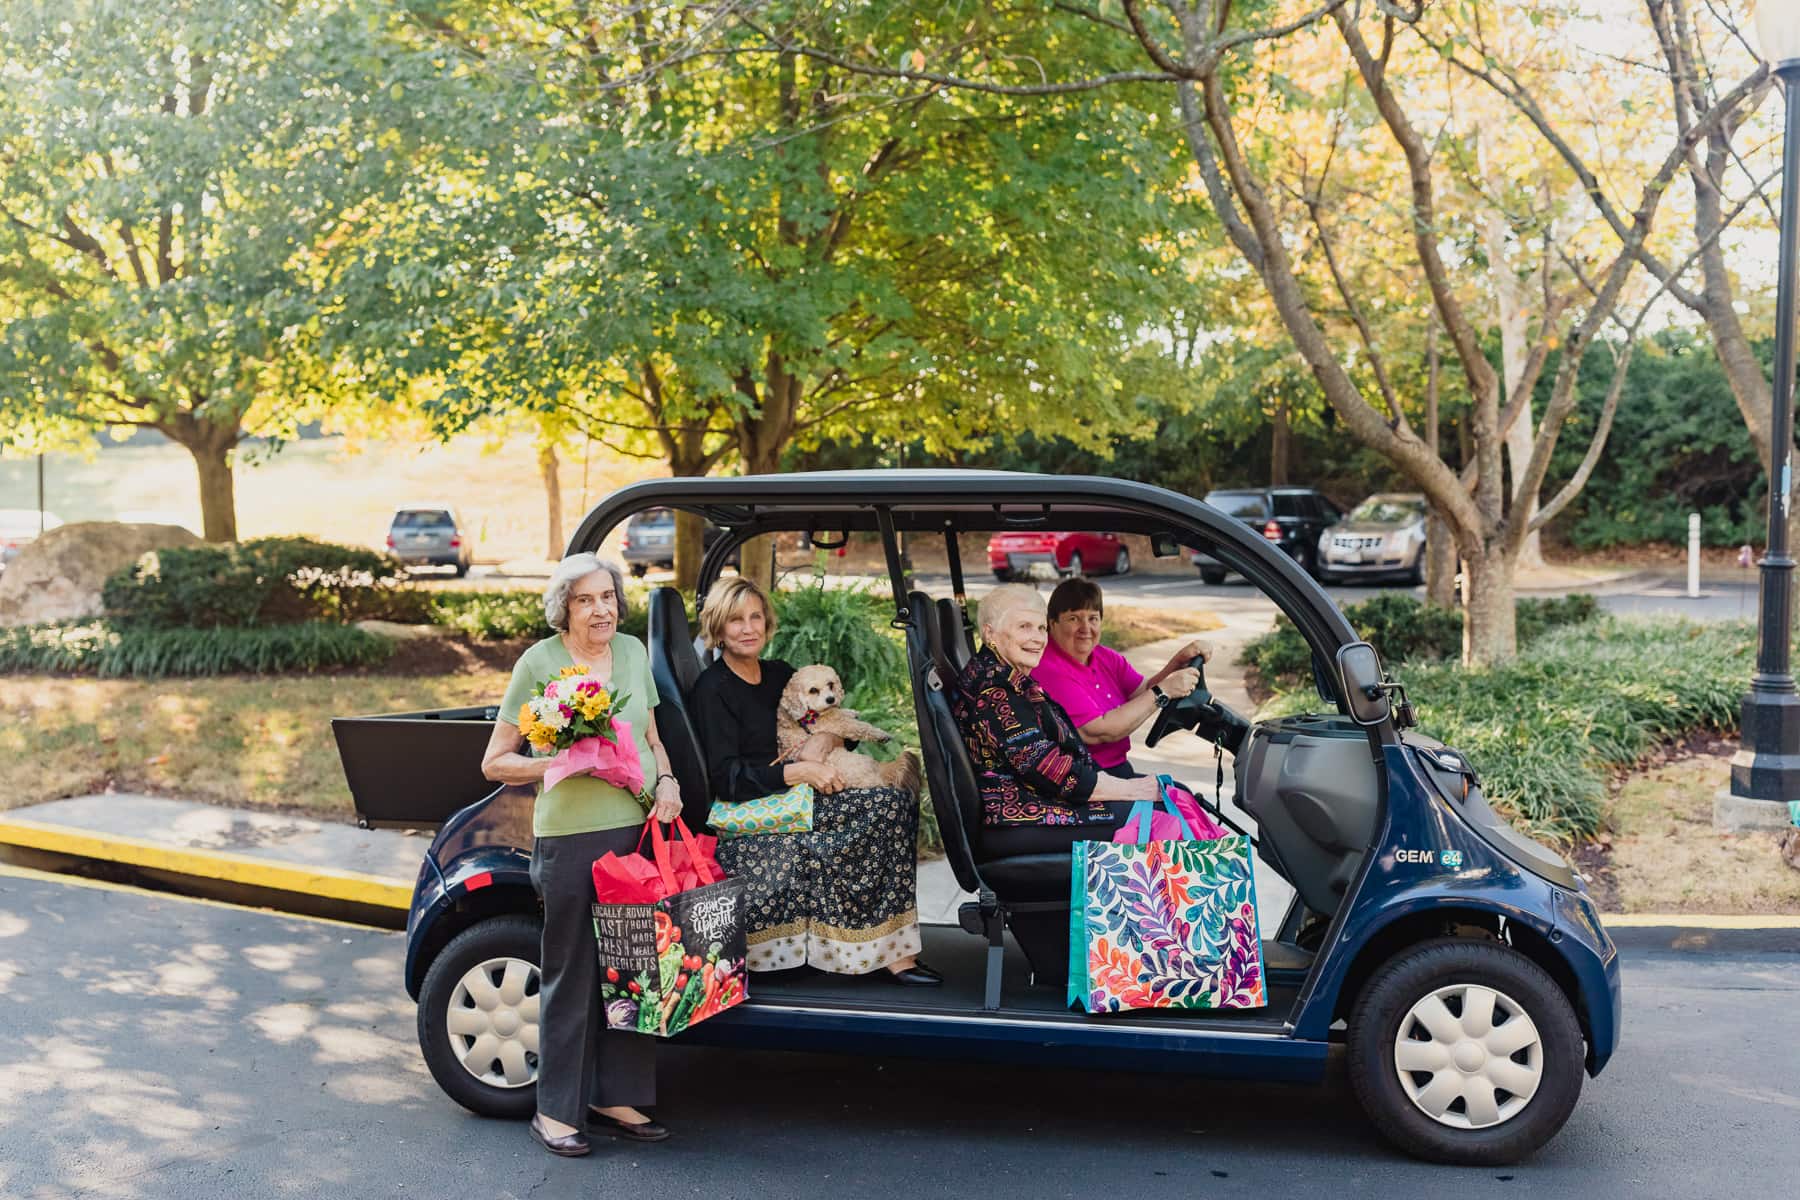 people in a car holding groceries, flowers and smiling outside